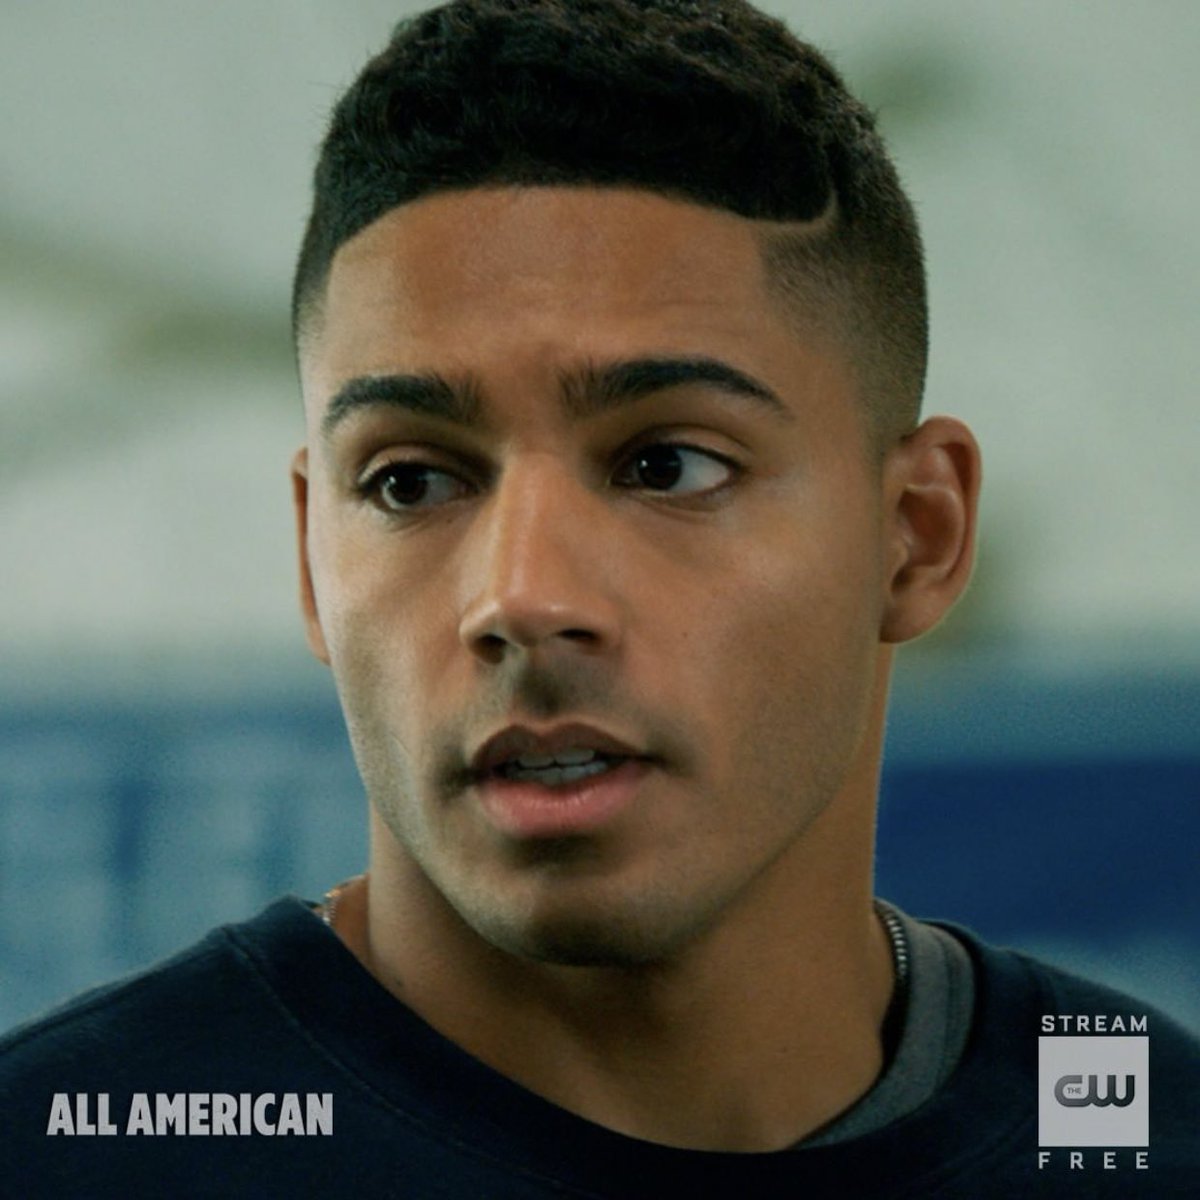 Thread of gifs and pictures of Jordan Baker from  #AllAmerican 